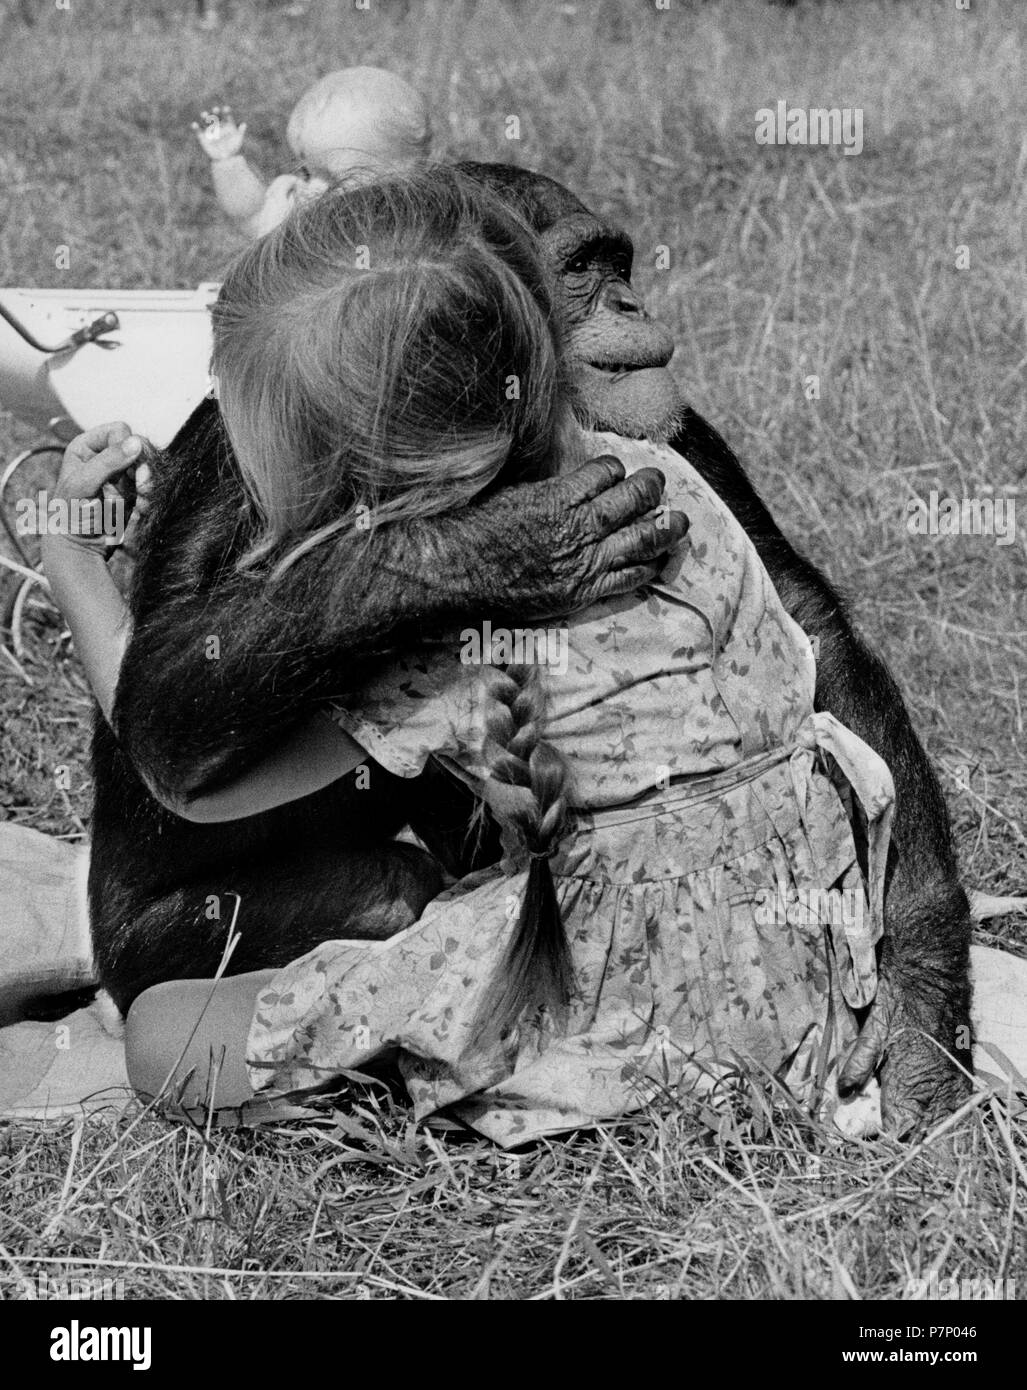 Chimpanzee and girl hugging each other in the meadow, England, Great Britain Stock Photo